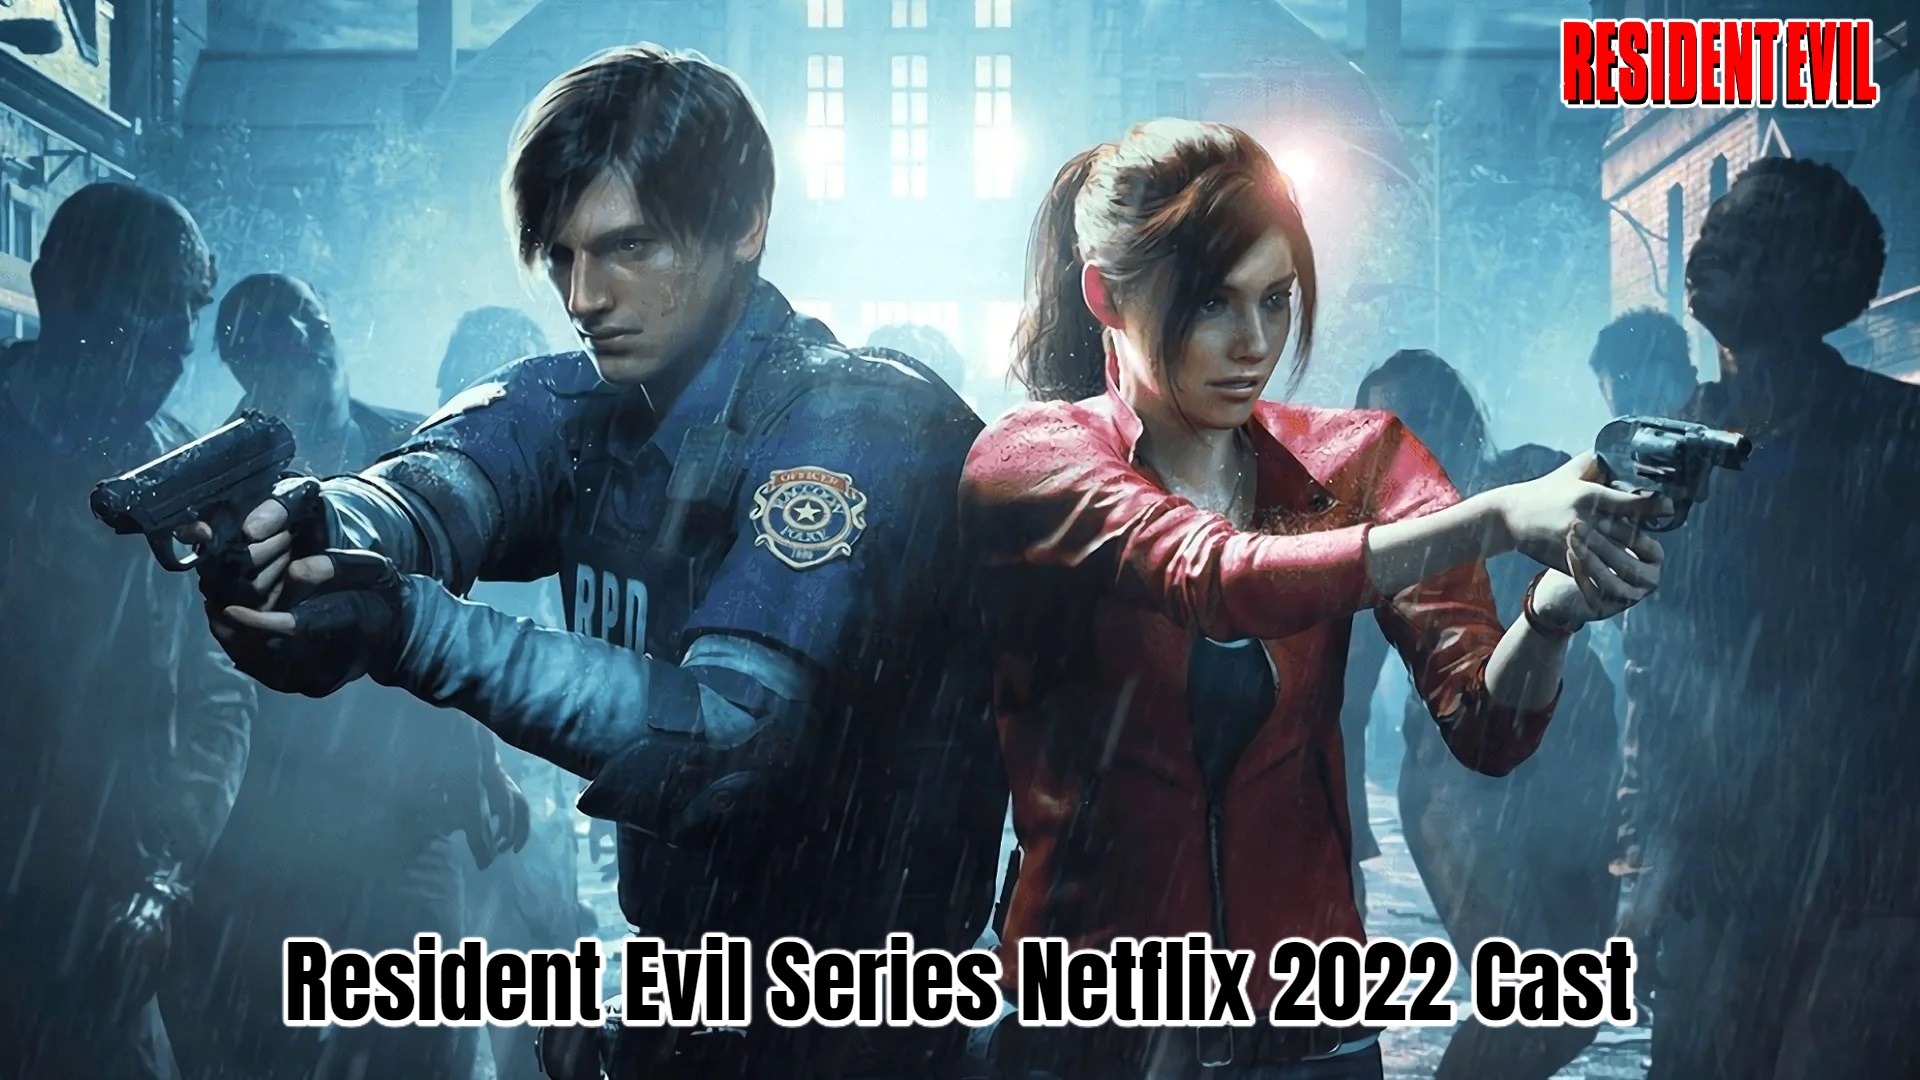 You are currently viewing Resident Evil Series Netflix 2022 Cast